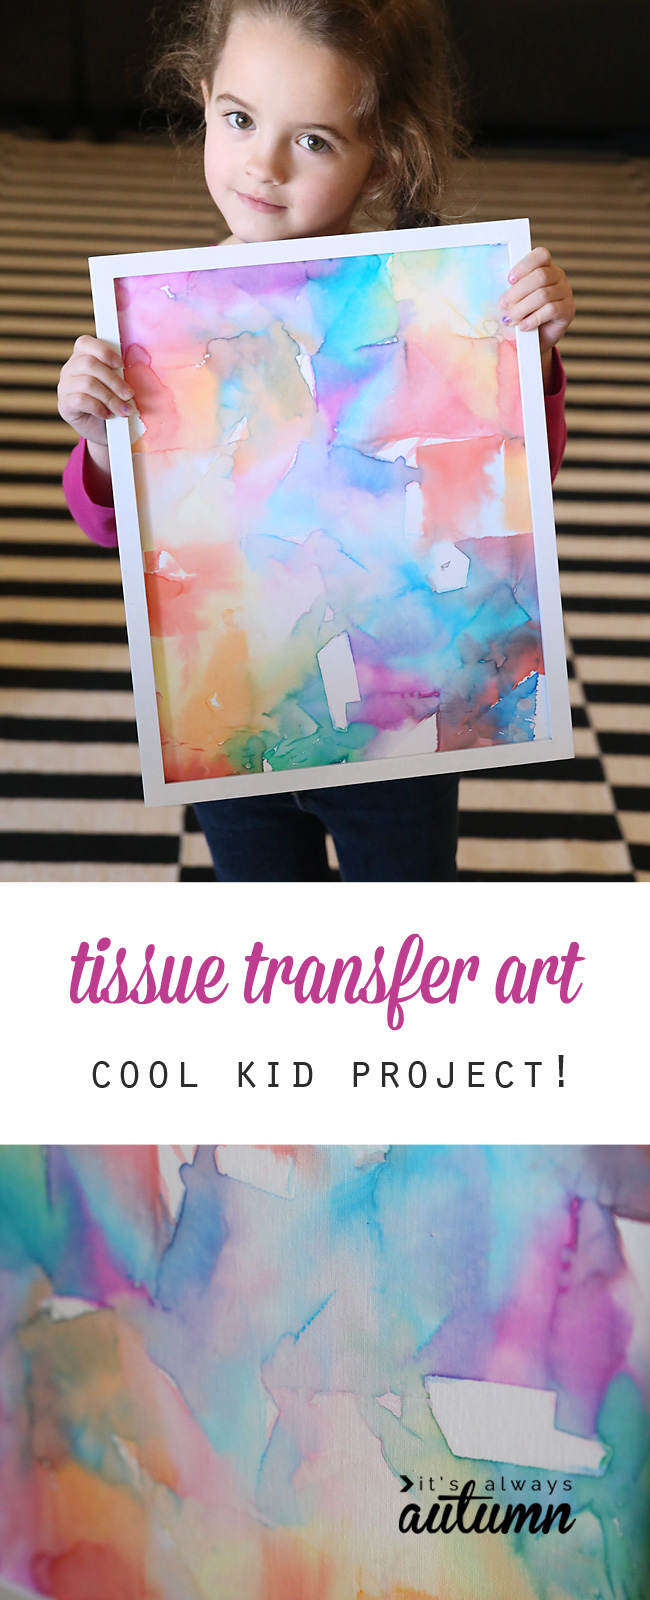 Beautiful Tissue Paper Crafts For Kids